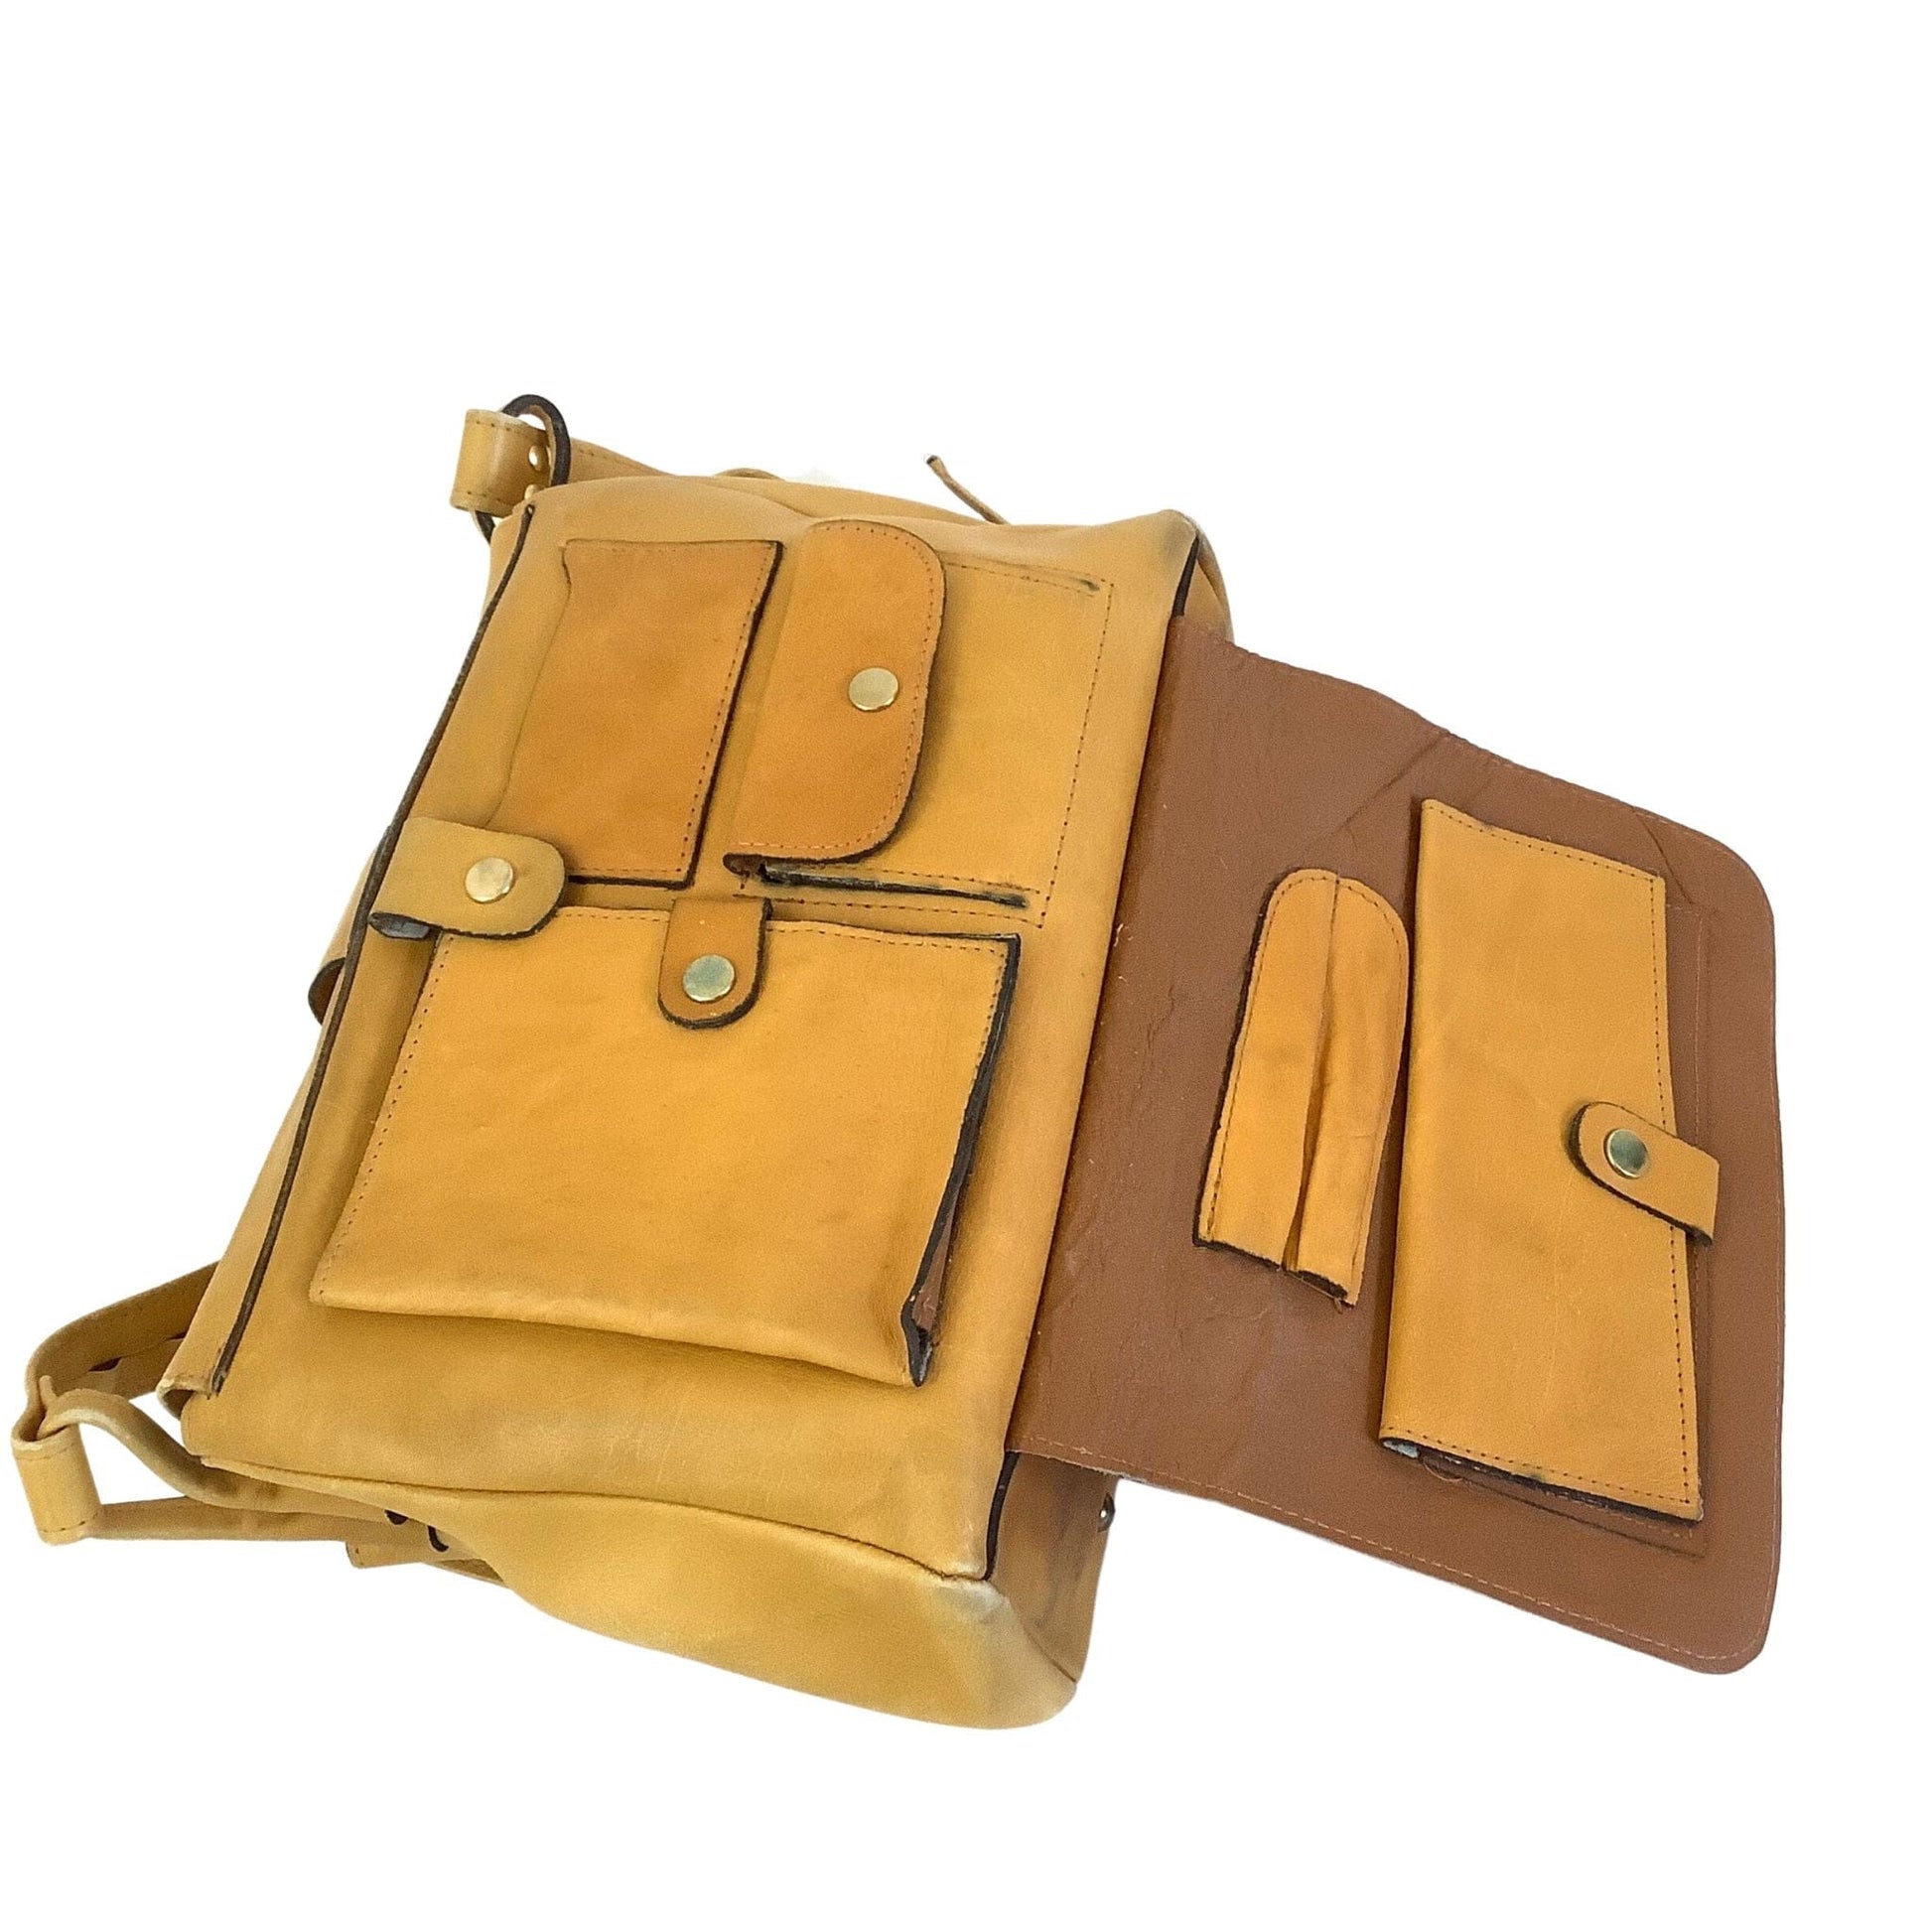 1960s Western Leather Bag Yellow / Leather / Vintage 1980s